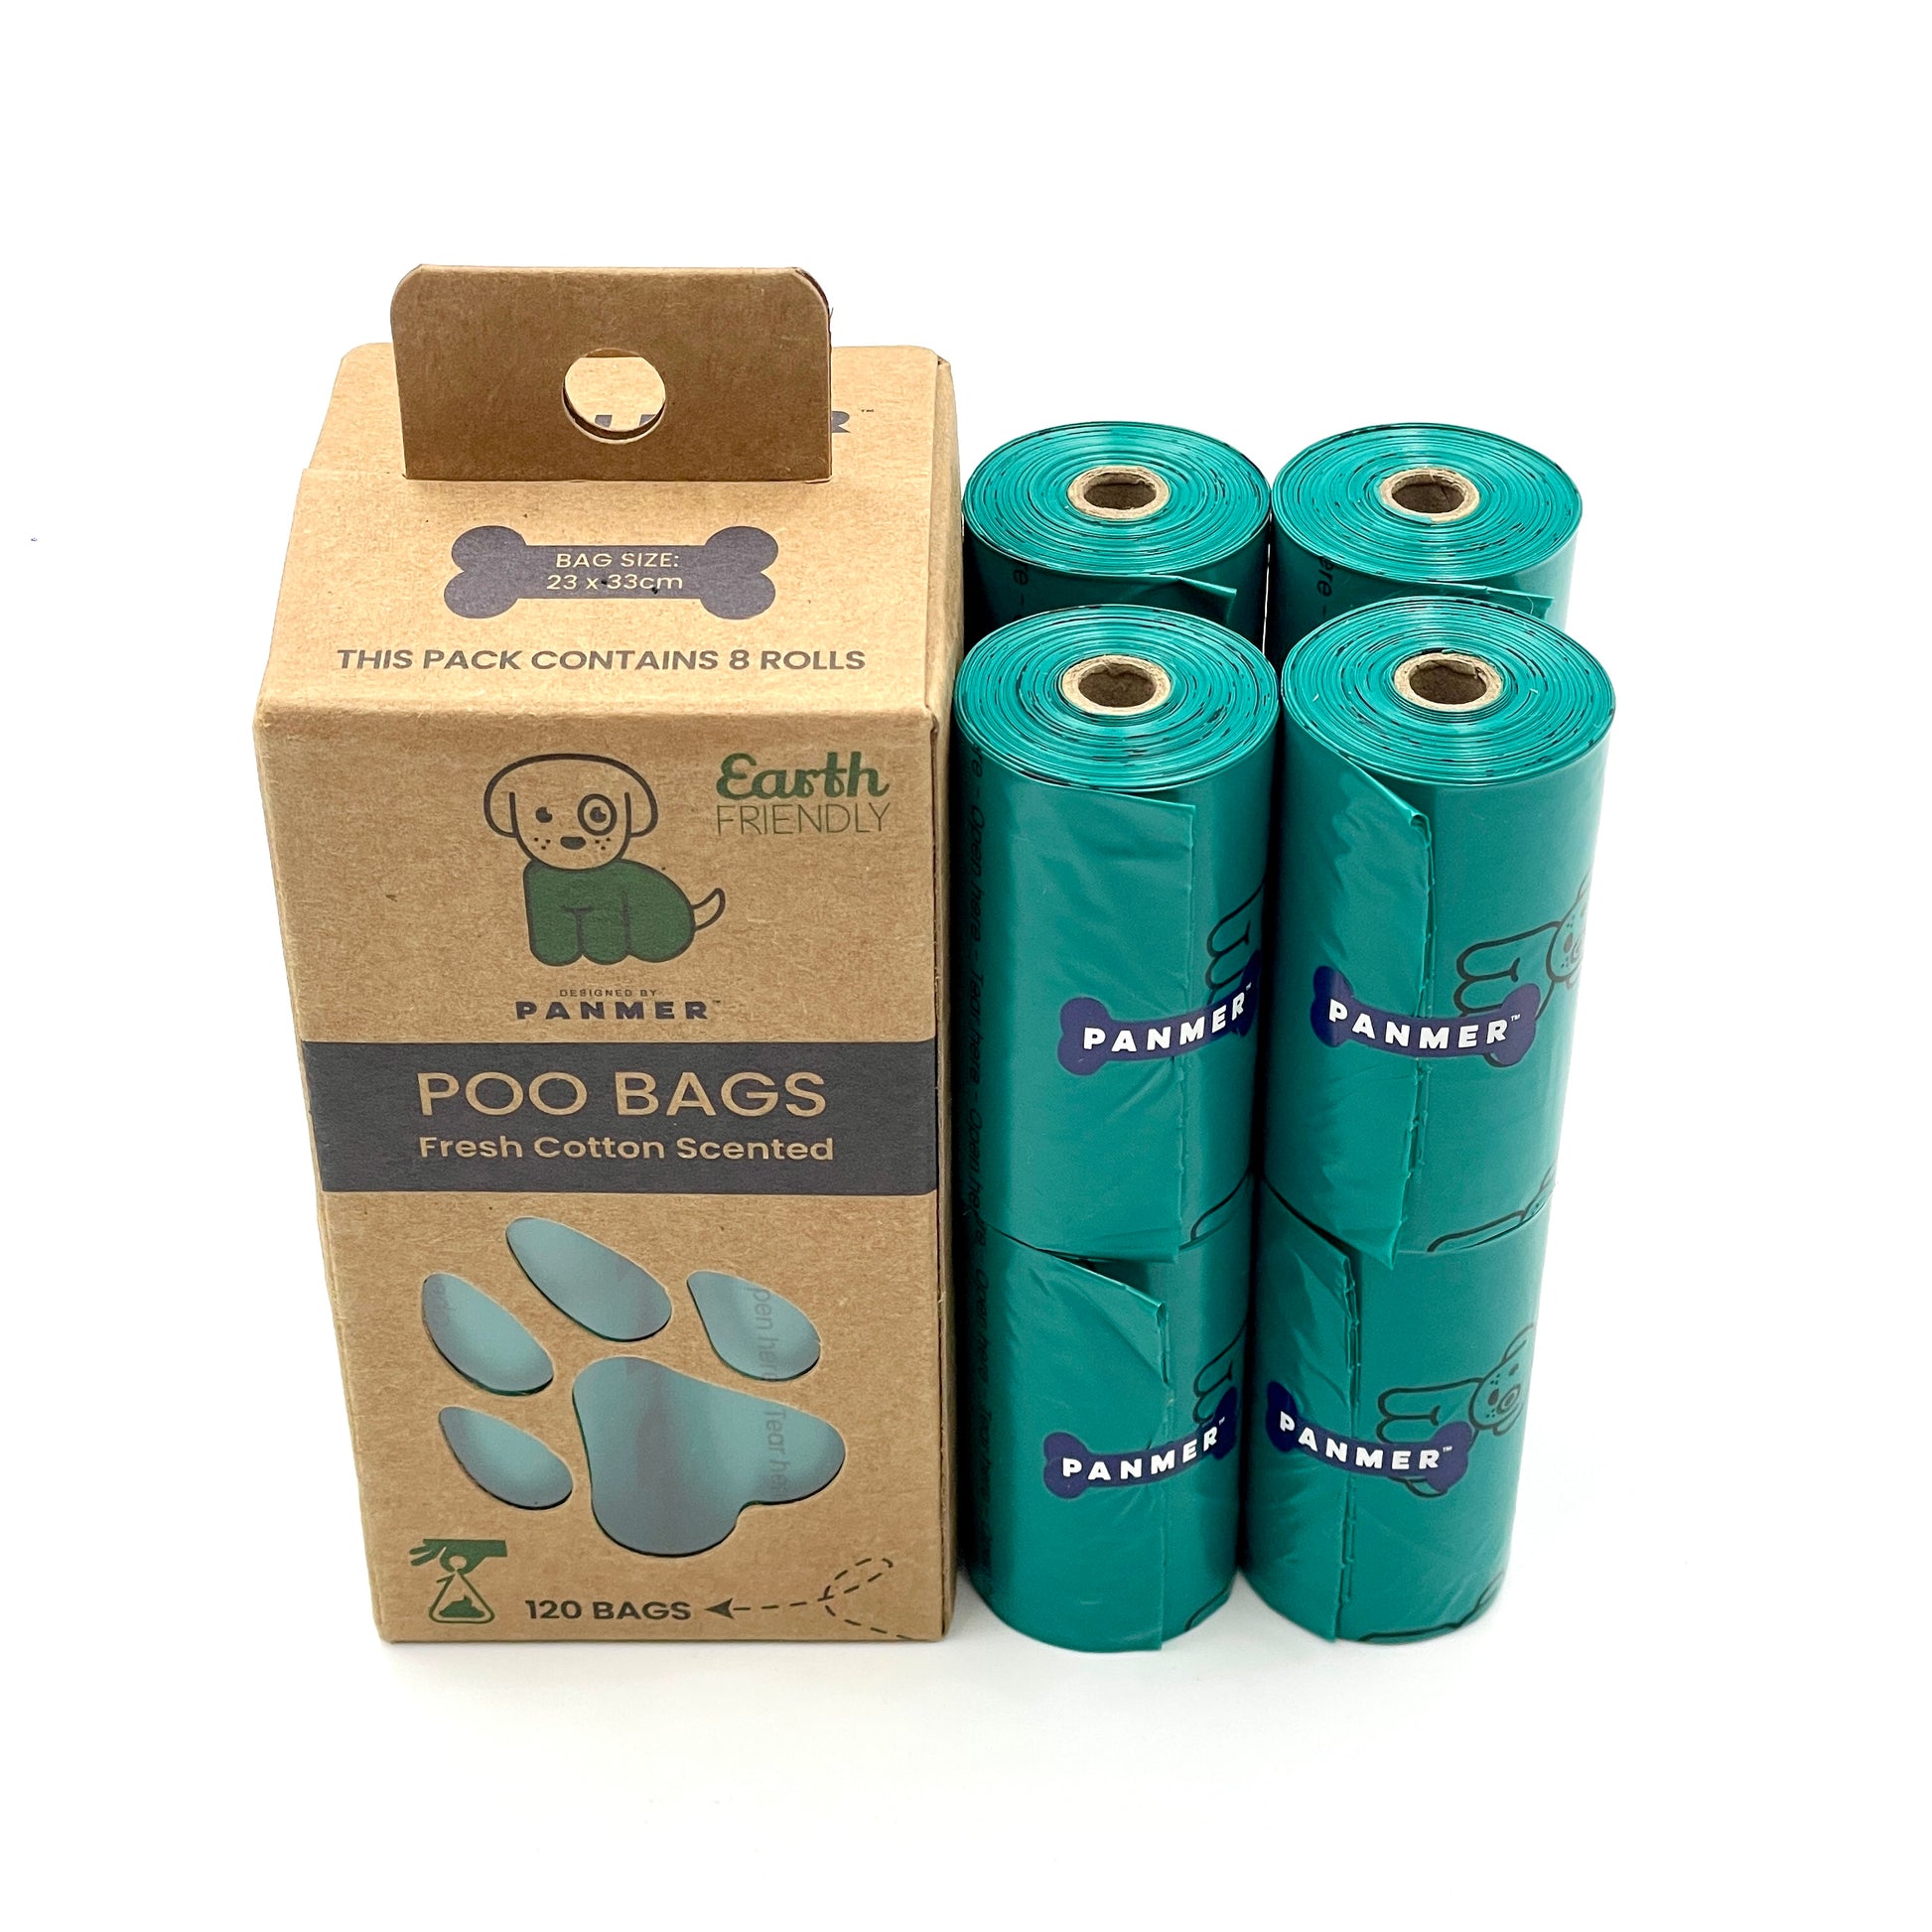 WHOLESALE – Poo Bags - PCR – Rolls – Cotton Fresh Scented – 120bags - #PCRPB120 - Pet Wipes & Poo Bags